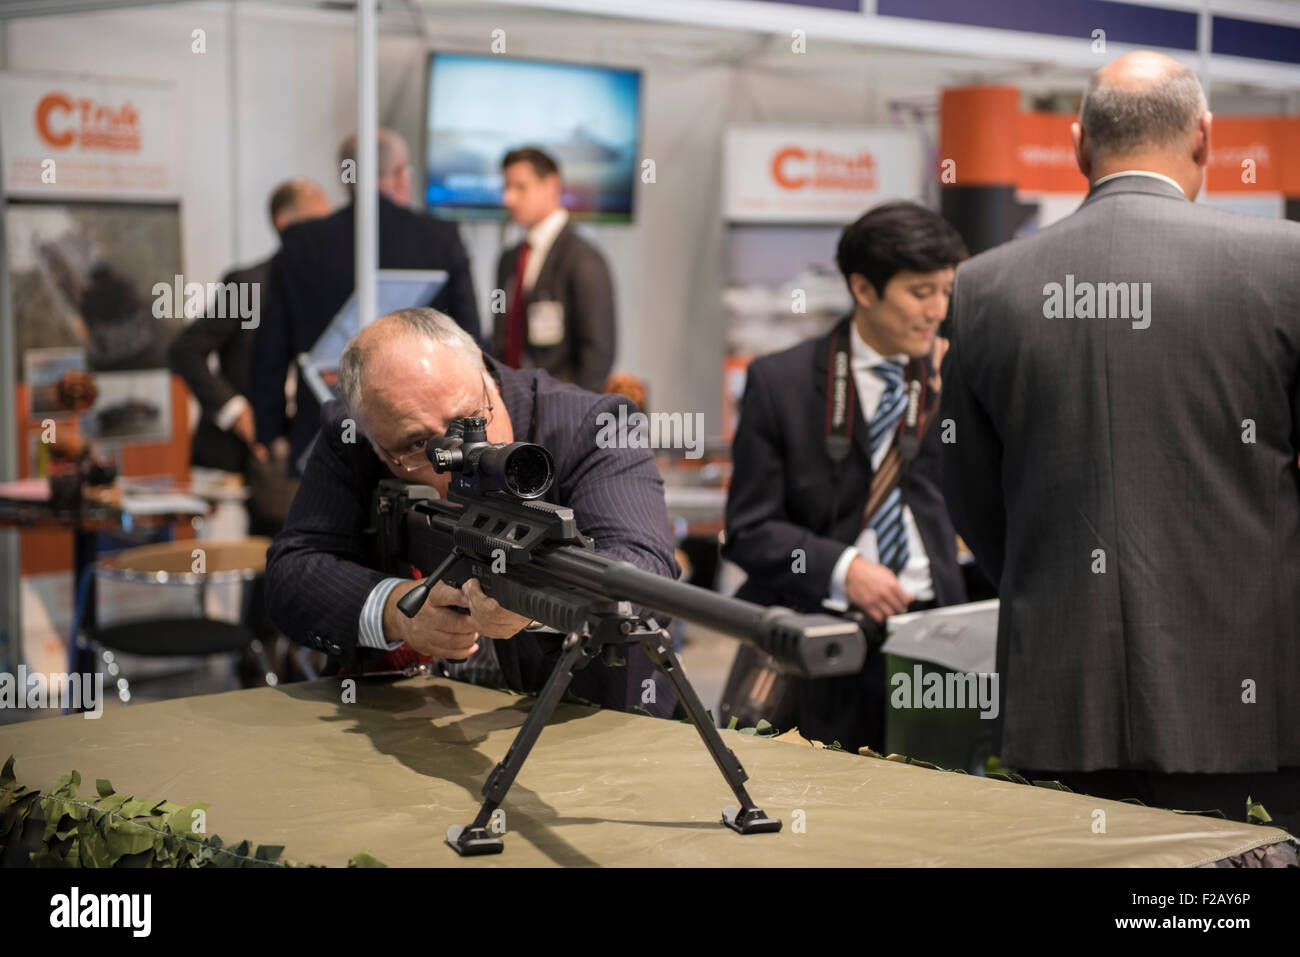 London, UK. 15th September, 2015. A man looks through the sight of a large gun that’s on display at DSEI, the world’s largest international defence & security exhibition held at London’s ExCel centre. Credit:  Peter Manning/Alamy Live News Stock Photo